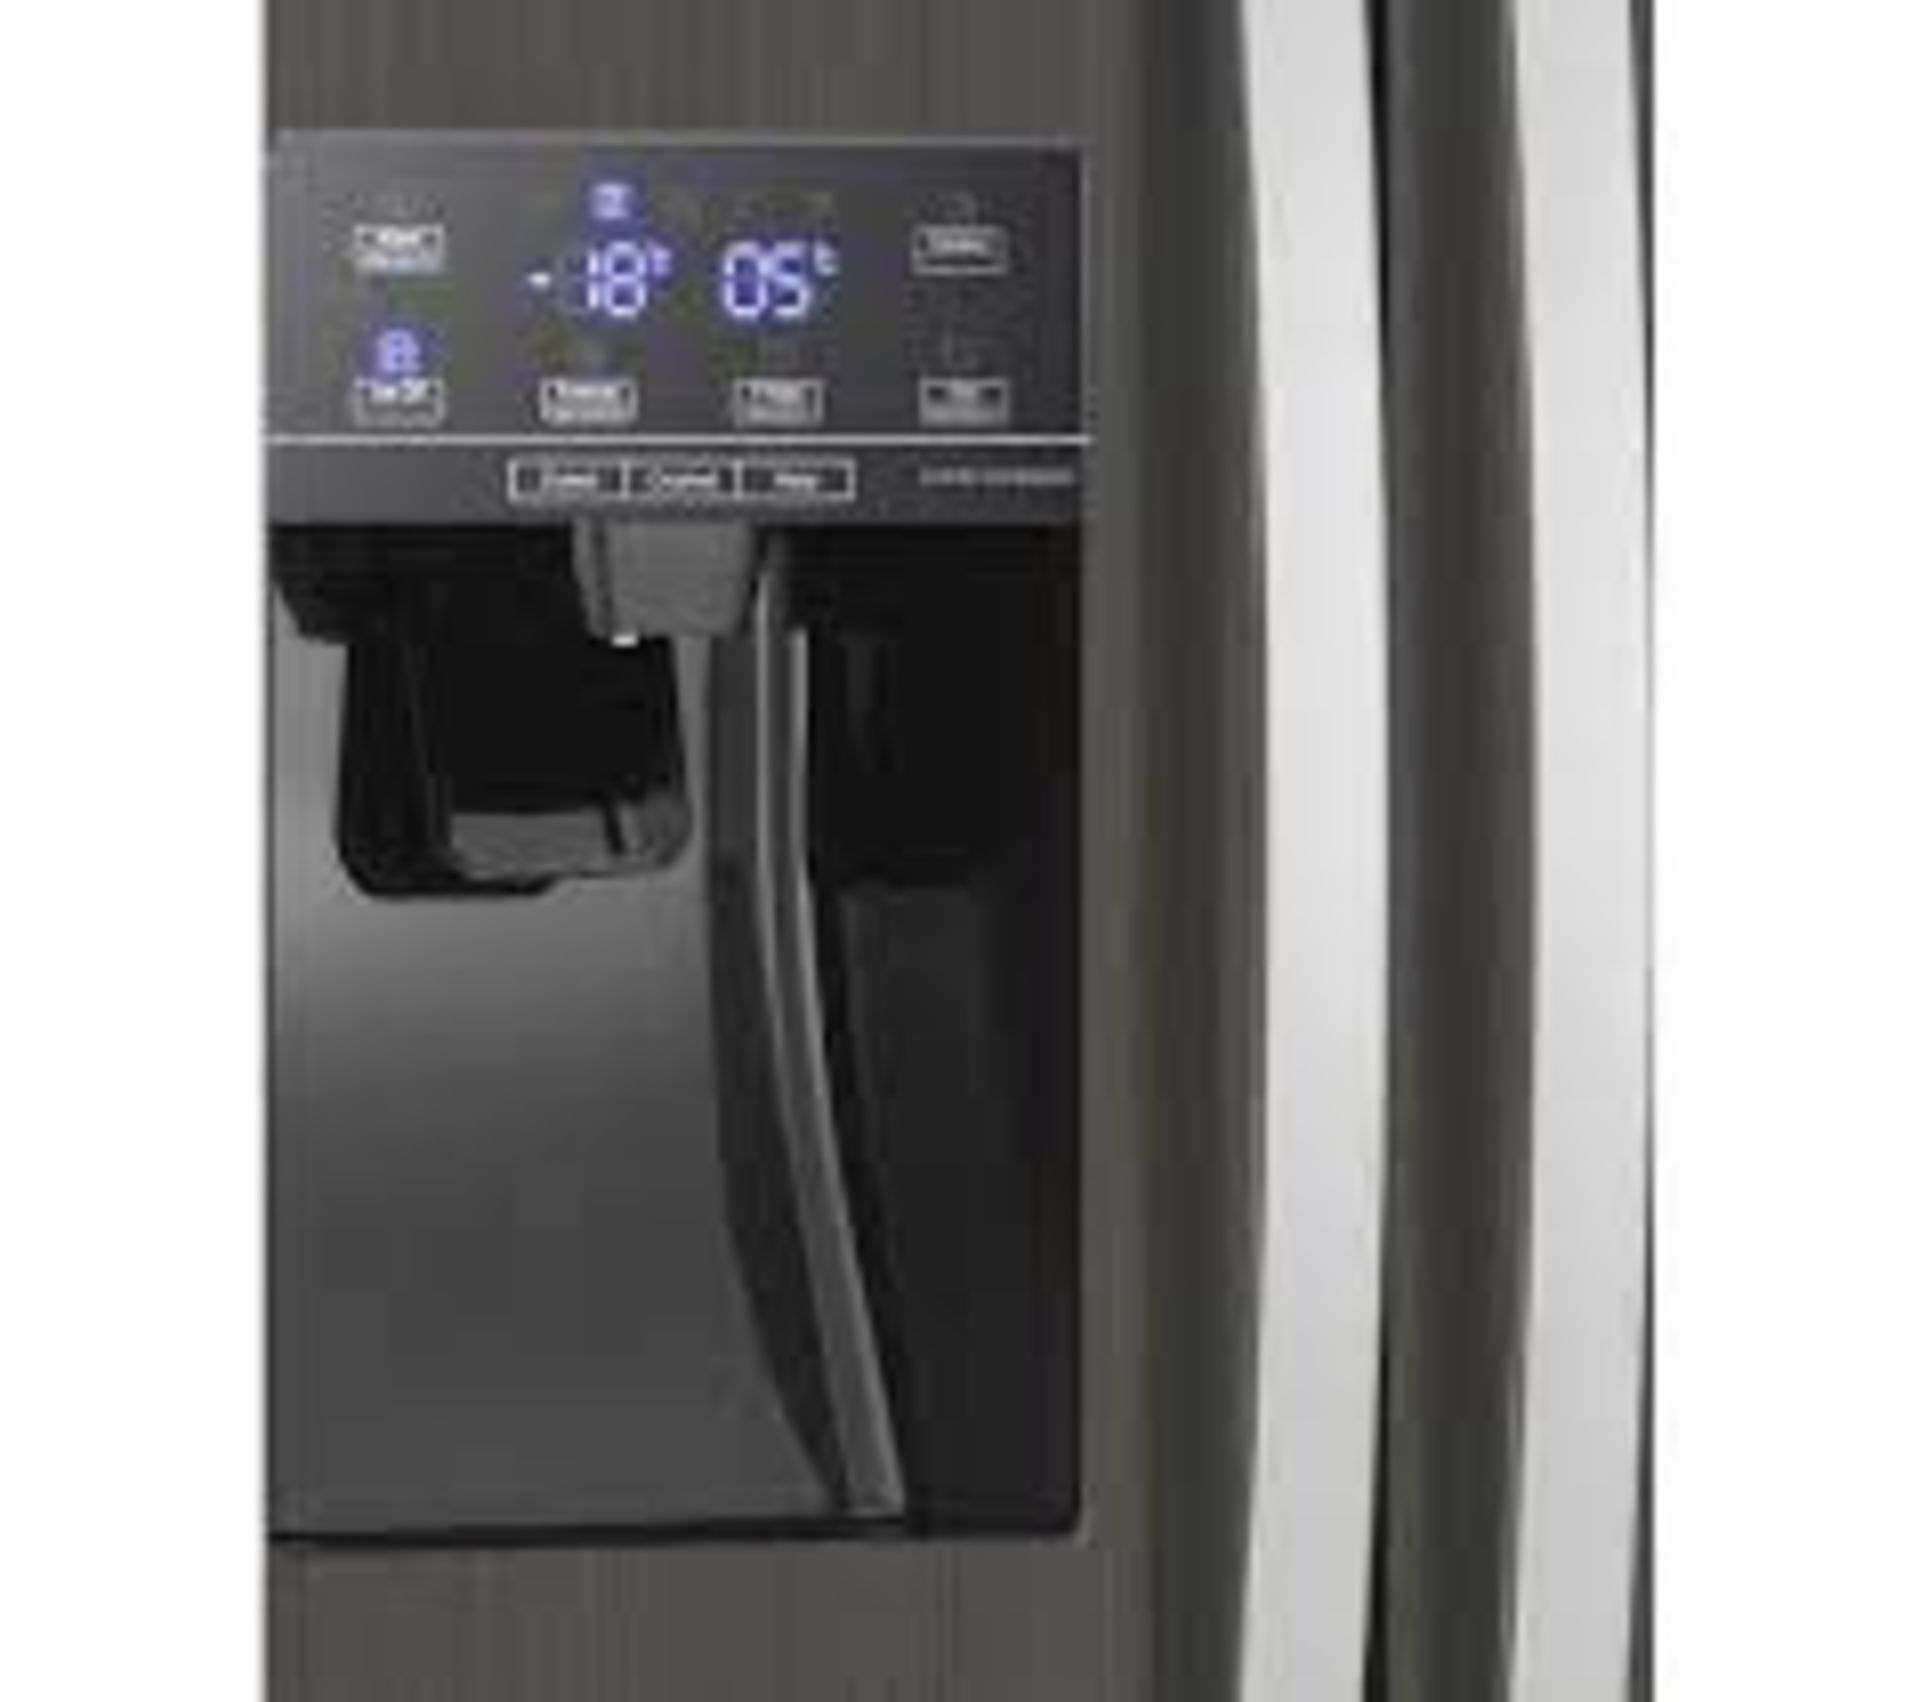 1 x Kenwood KSBSDiX20 Stainless Steel American Style Fridge Freezer With Water and Ice Dispenser - Image 4 of 8